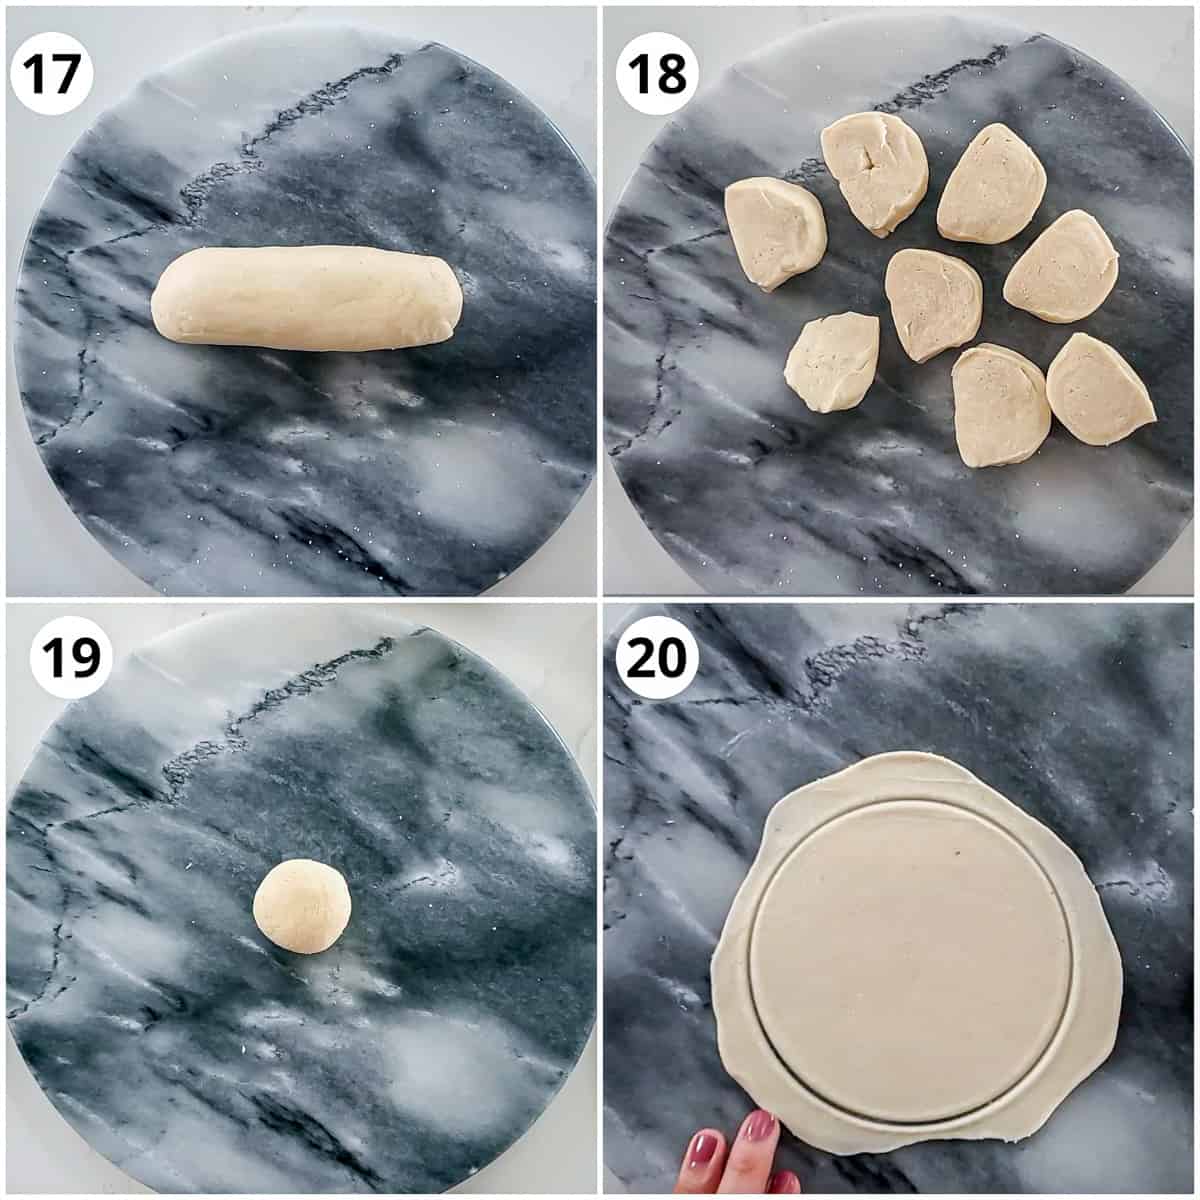 Steps to show dividing dough for karanji and then rolling each portion round